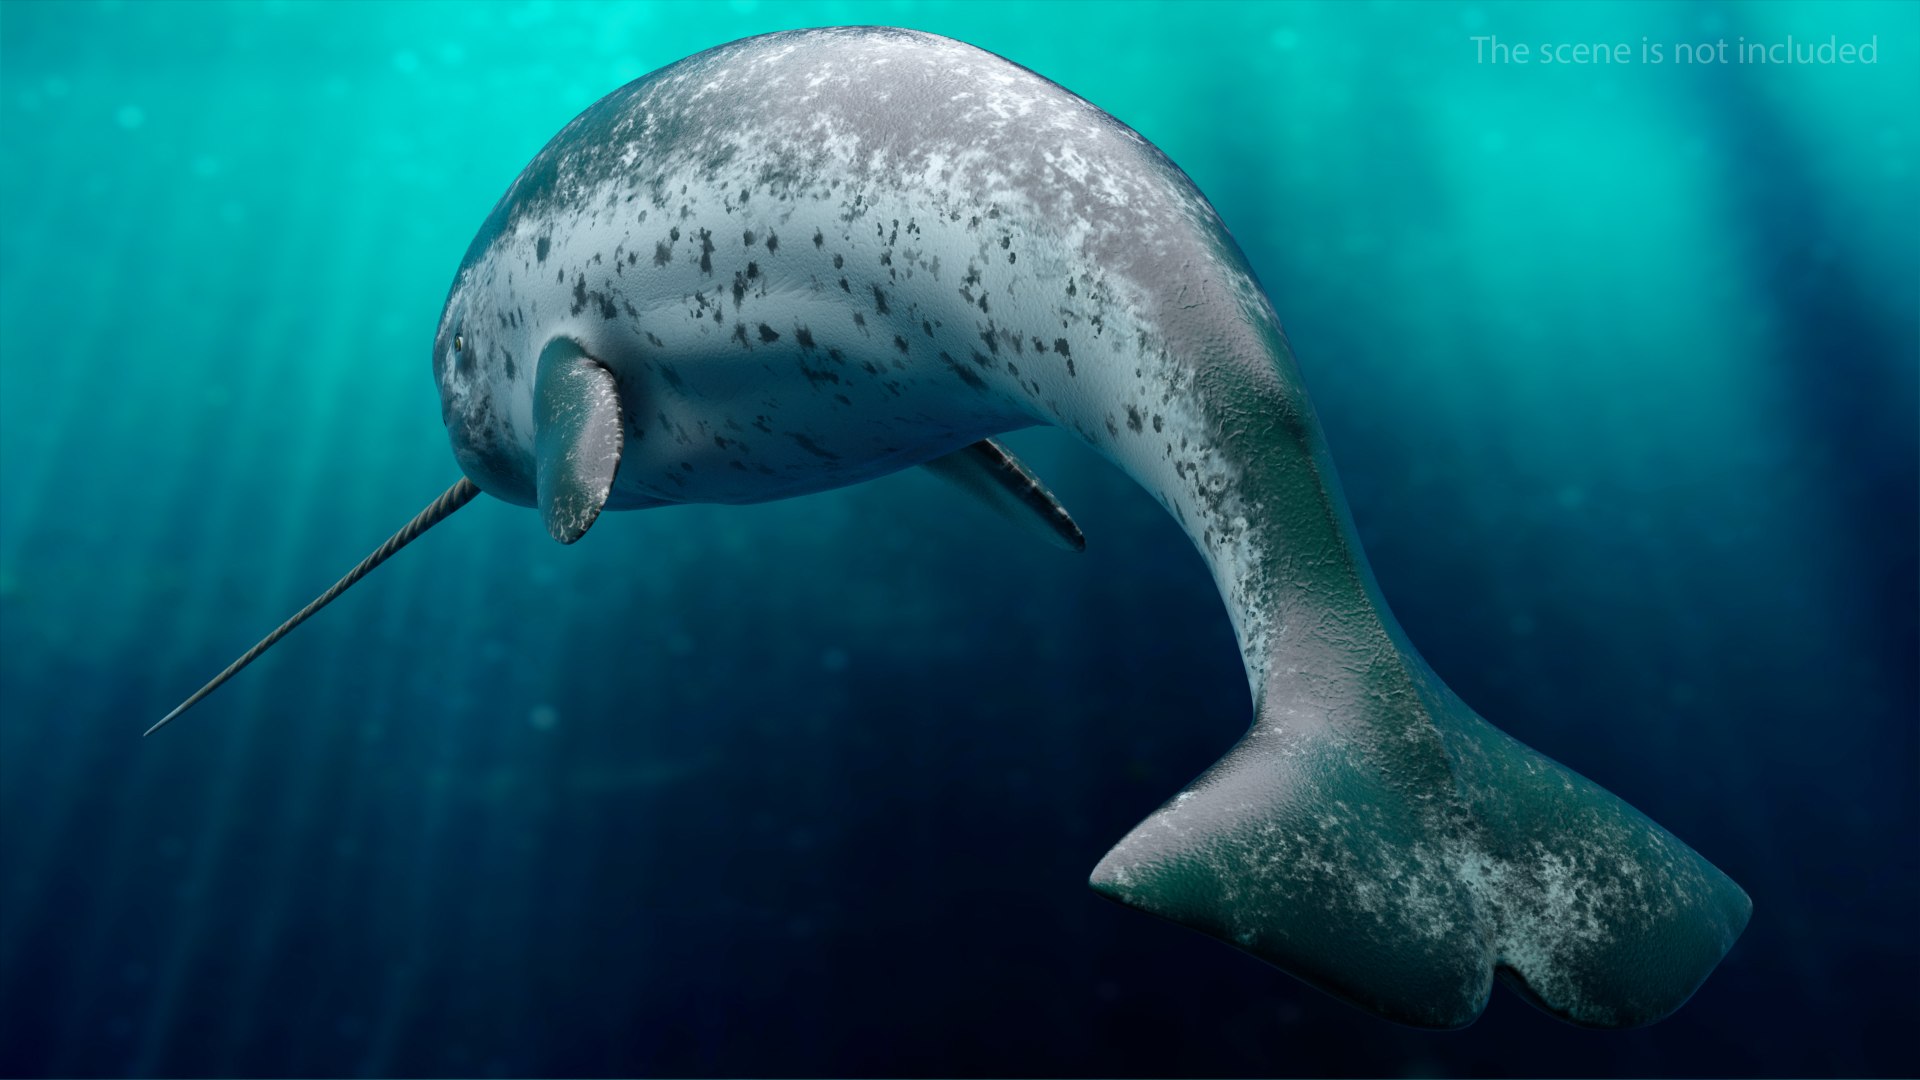 Toothed whale narwhal rigged animal 3D model - TurboSquid 1493032